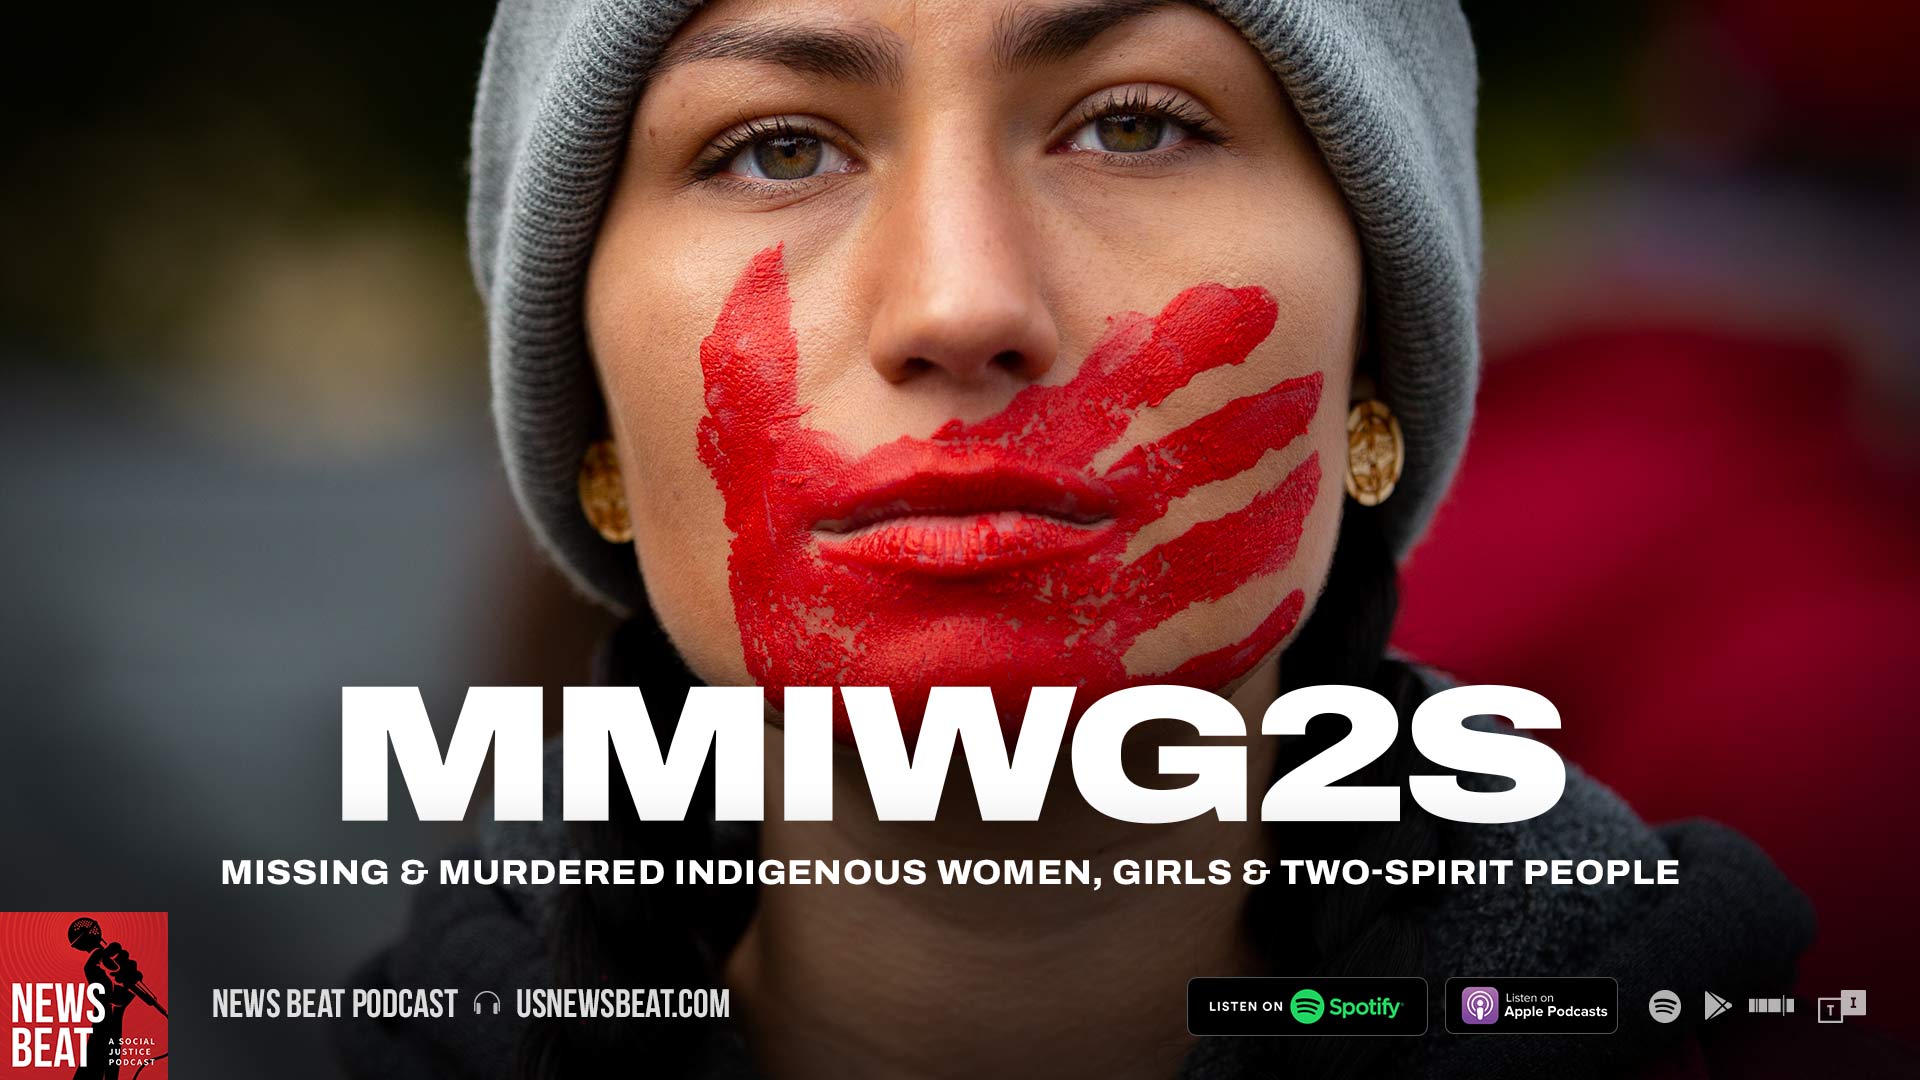 News Beat Signal Award winning episode, "MMIWG2S: Missing and Murdered Indigenous Women, Girls and Two-Spirit People"